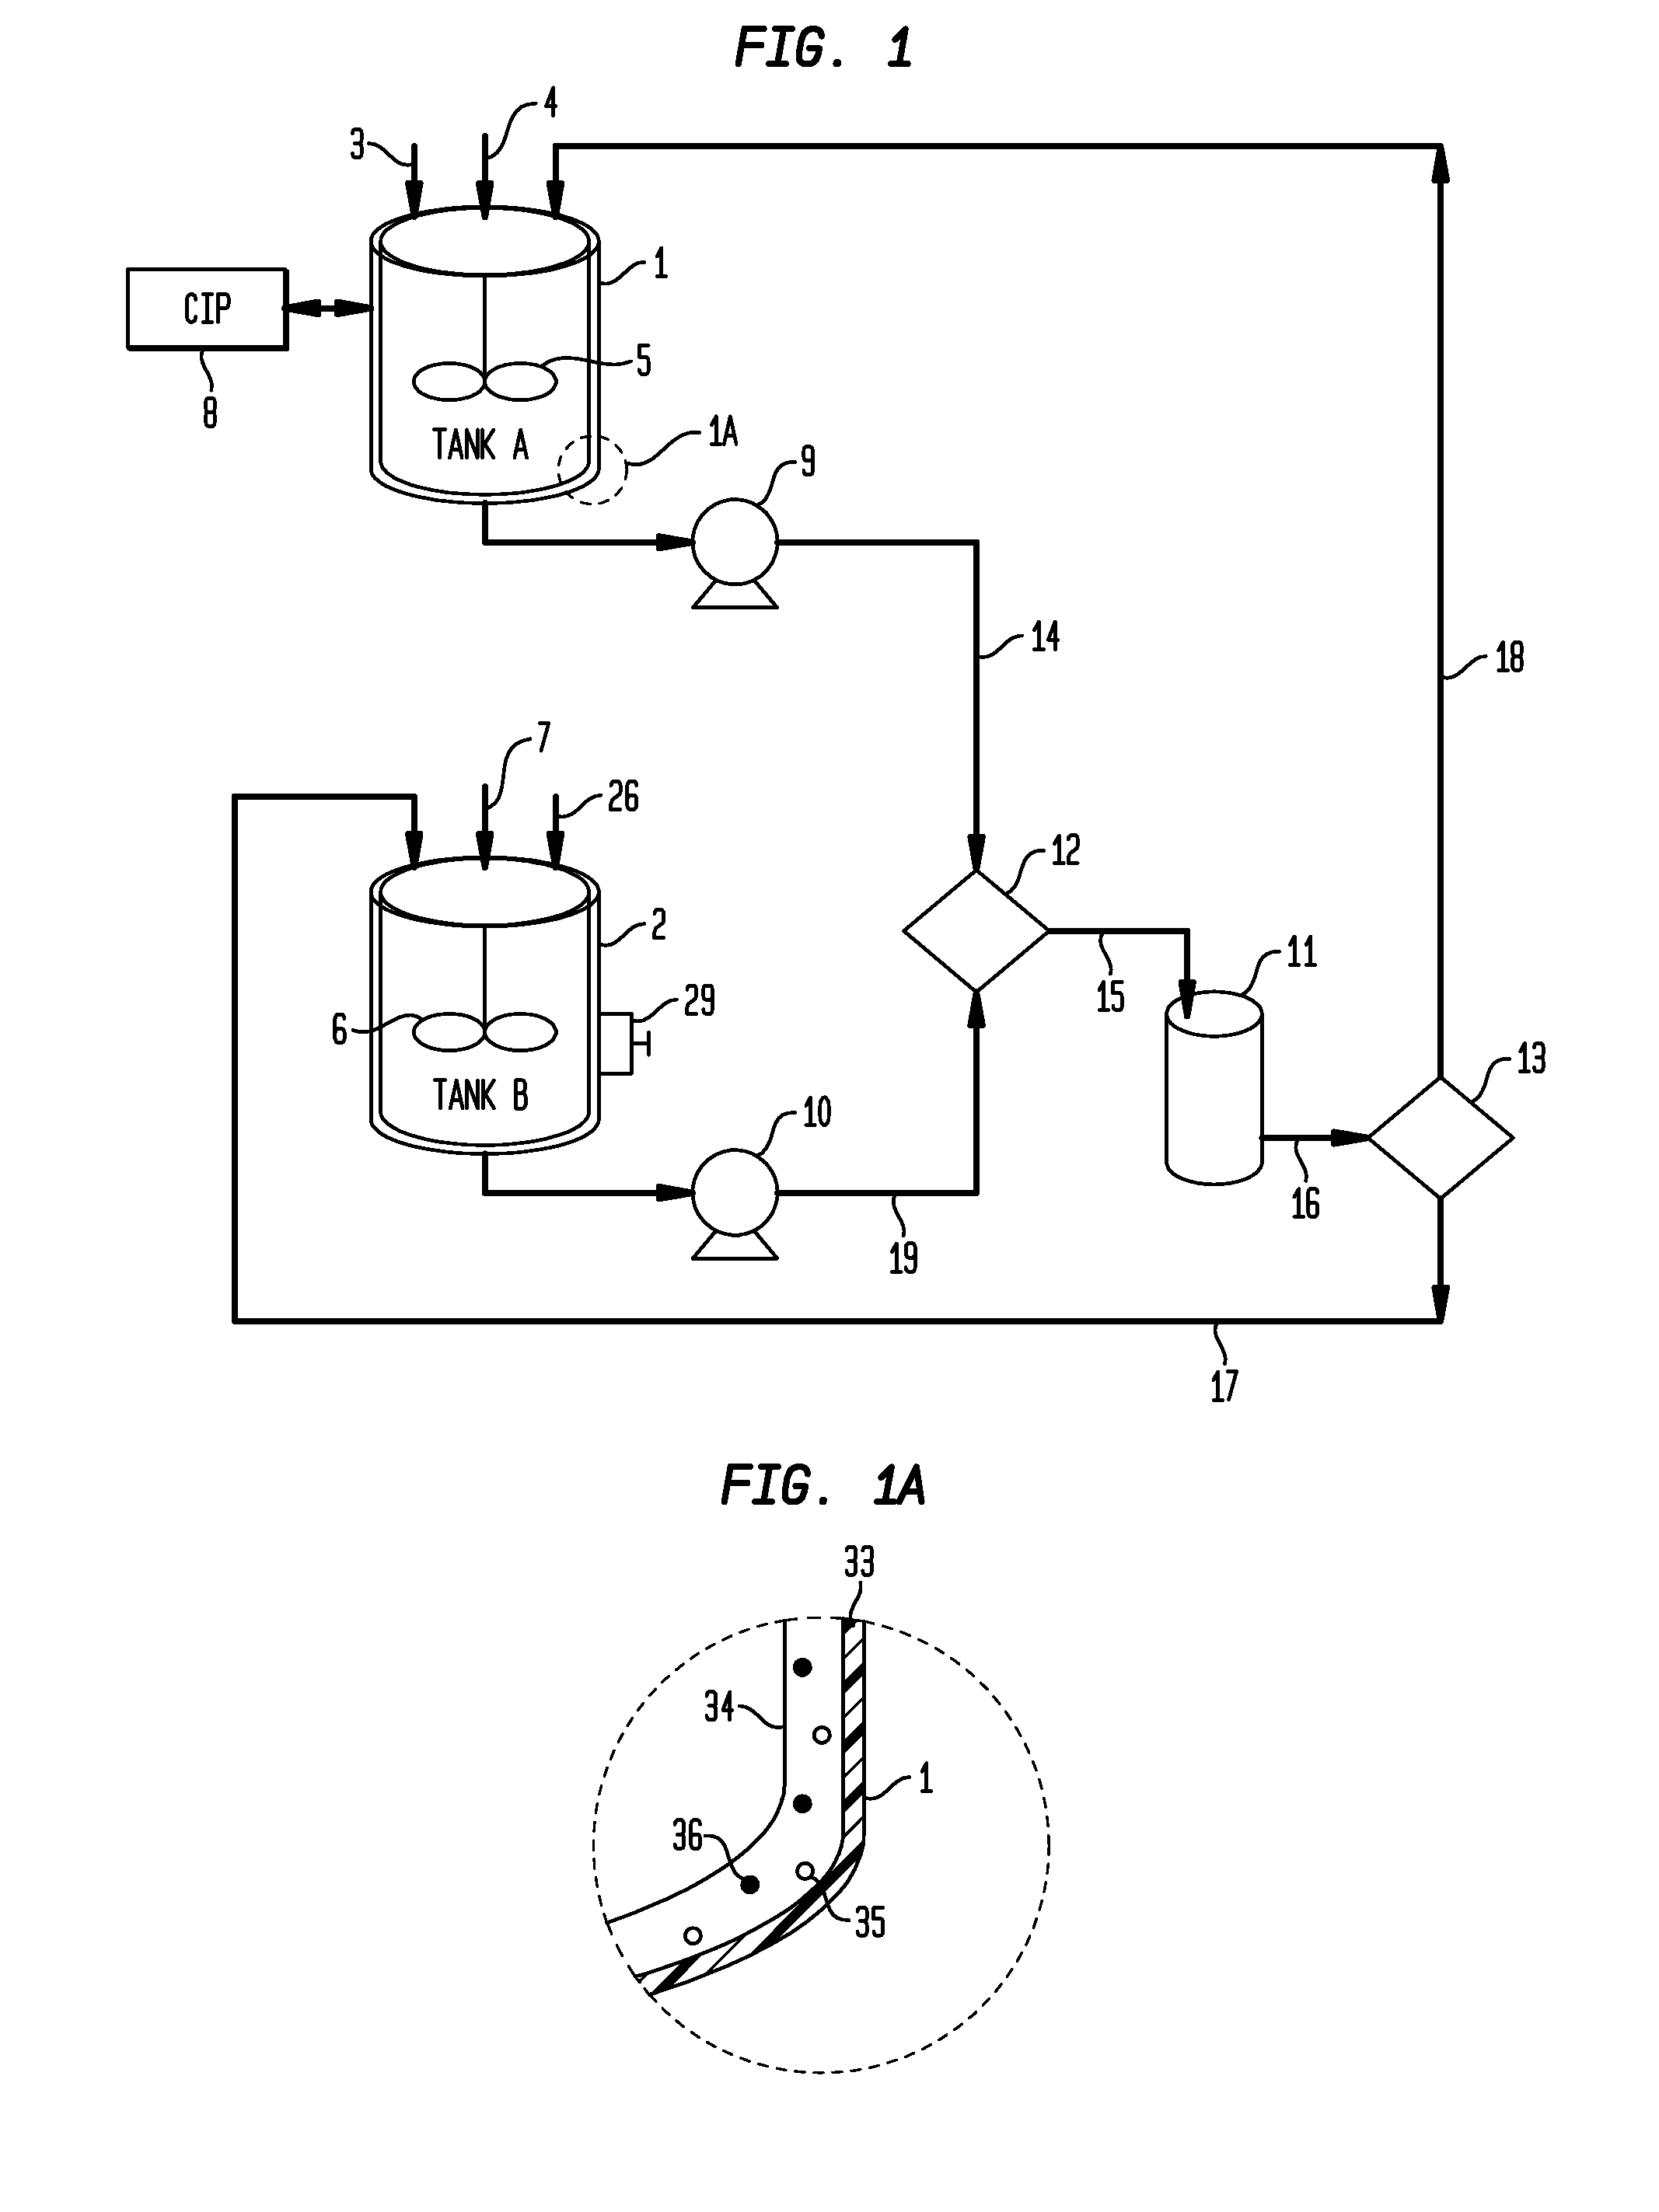 Machine and process for producing a solid alcohol product